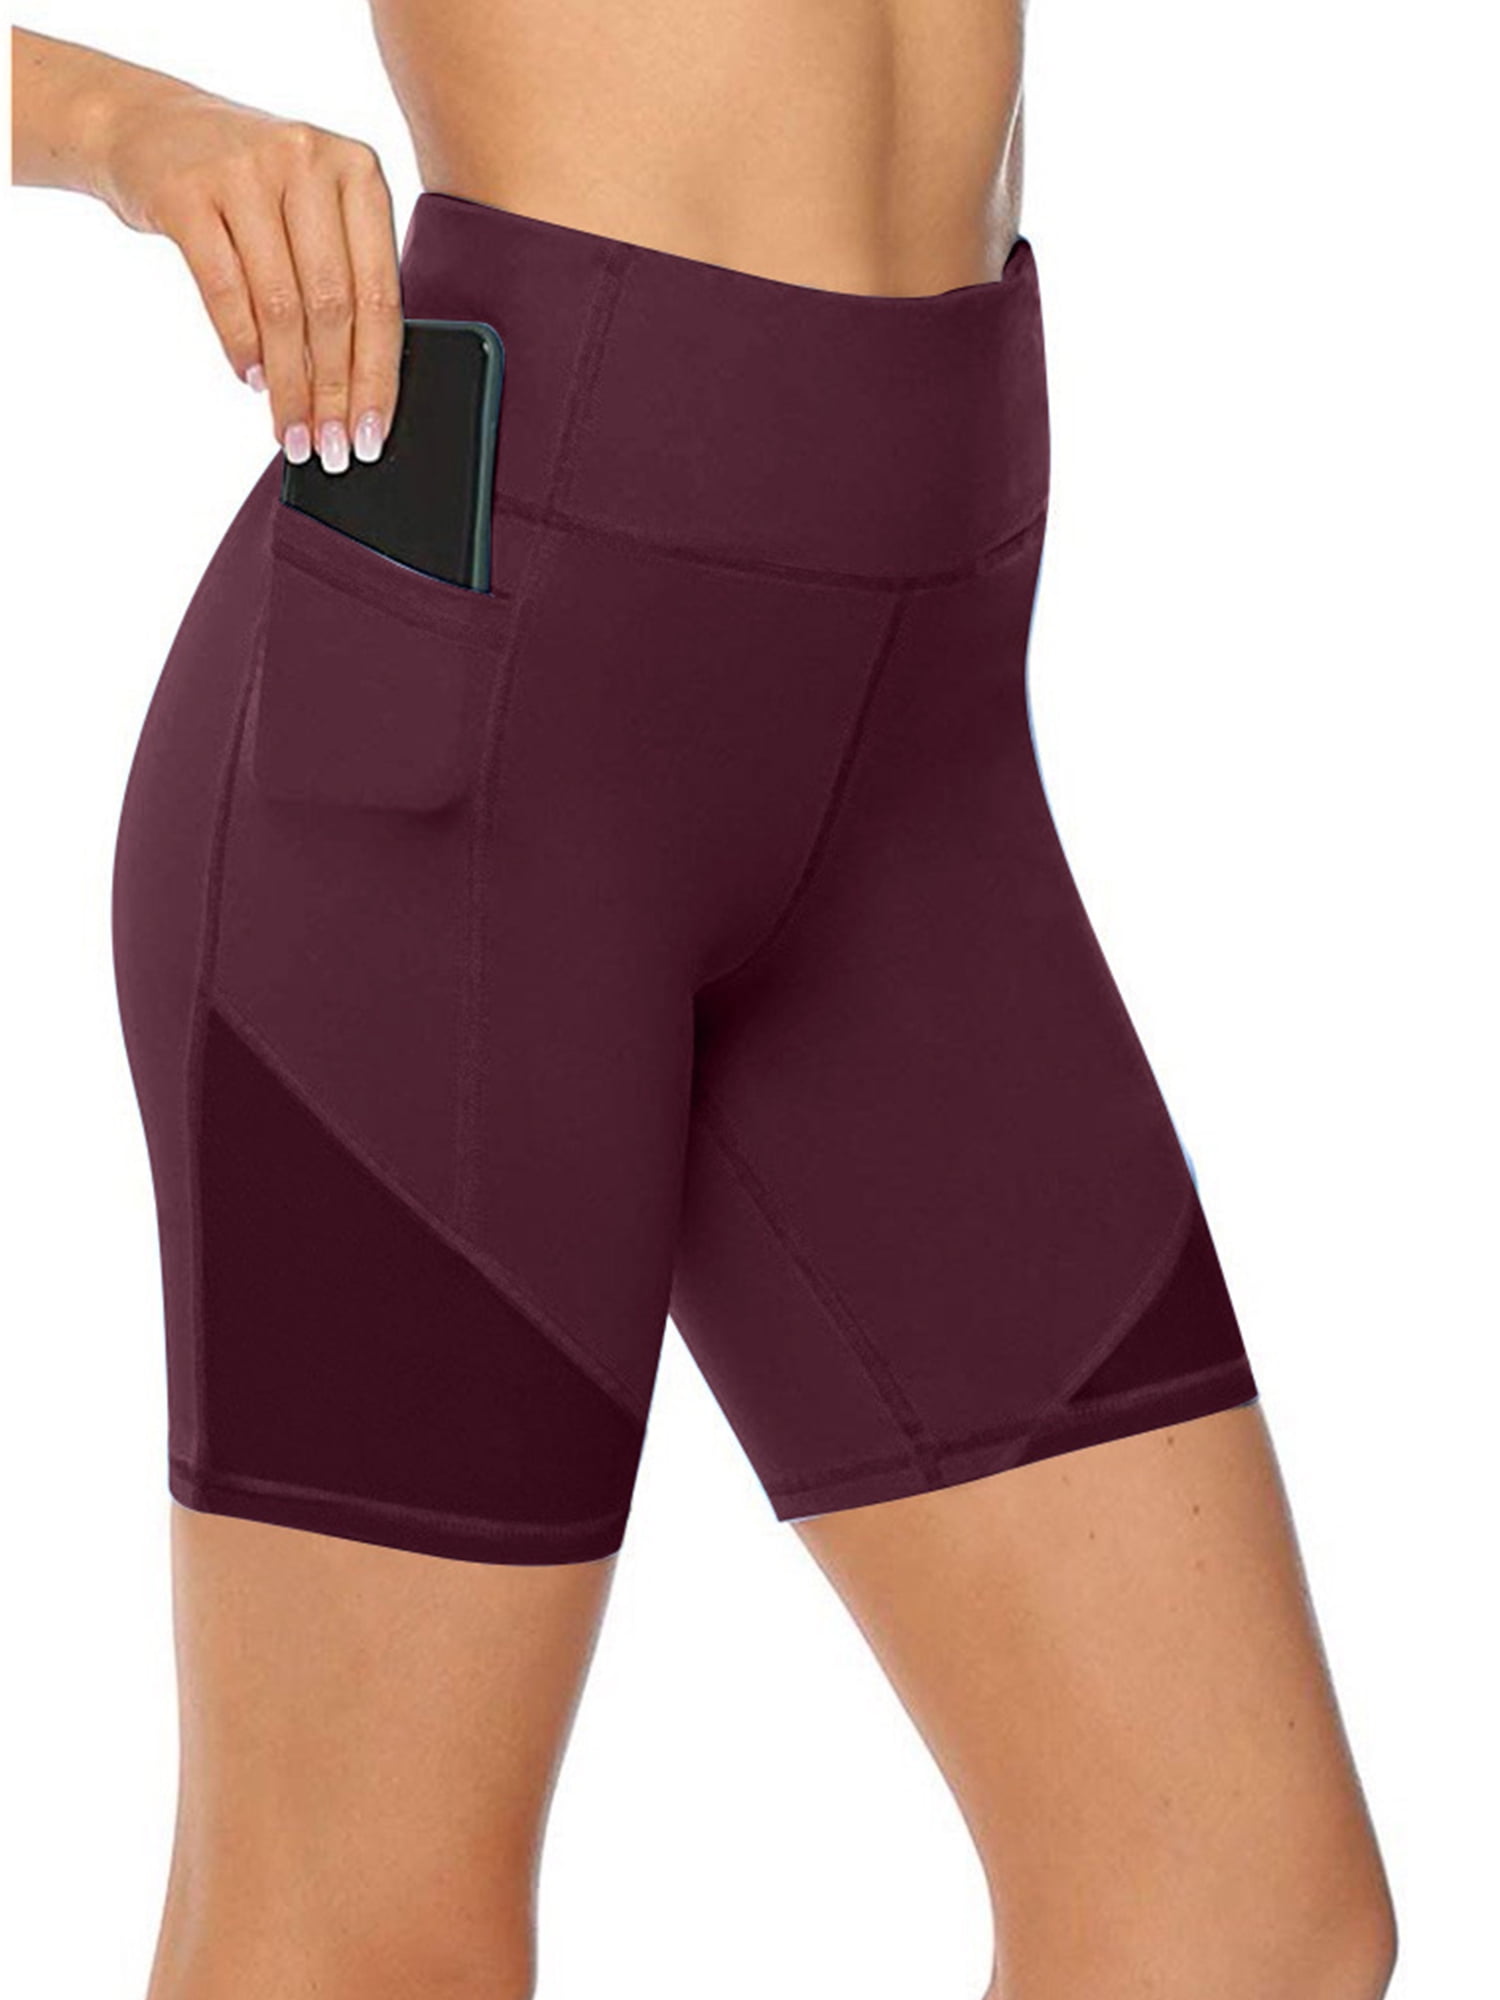 fang Fans Women High Waist Out Pocket Yoga Short Running Athletic Yoga Shorts Pants Tummy Control with Side Pockets Cycling Running Shorts